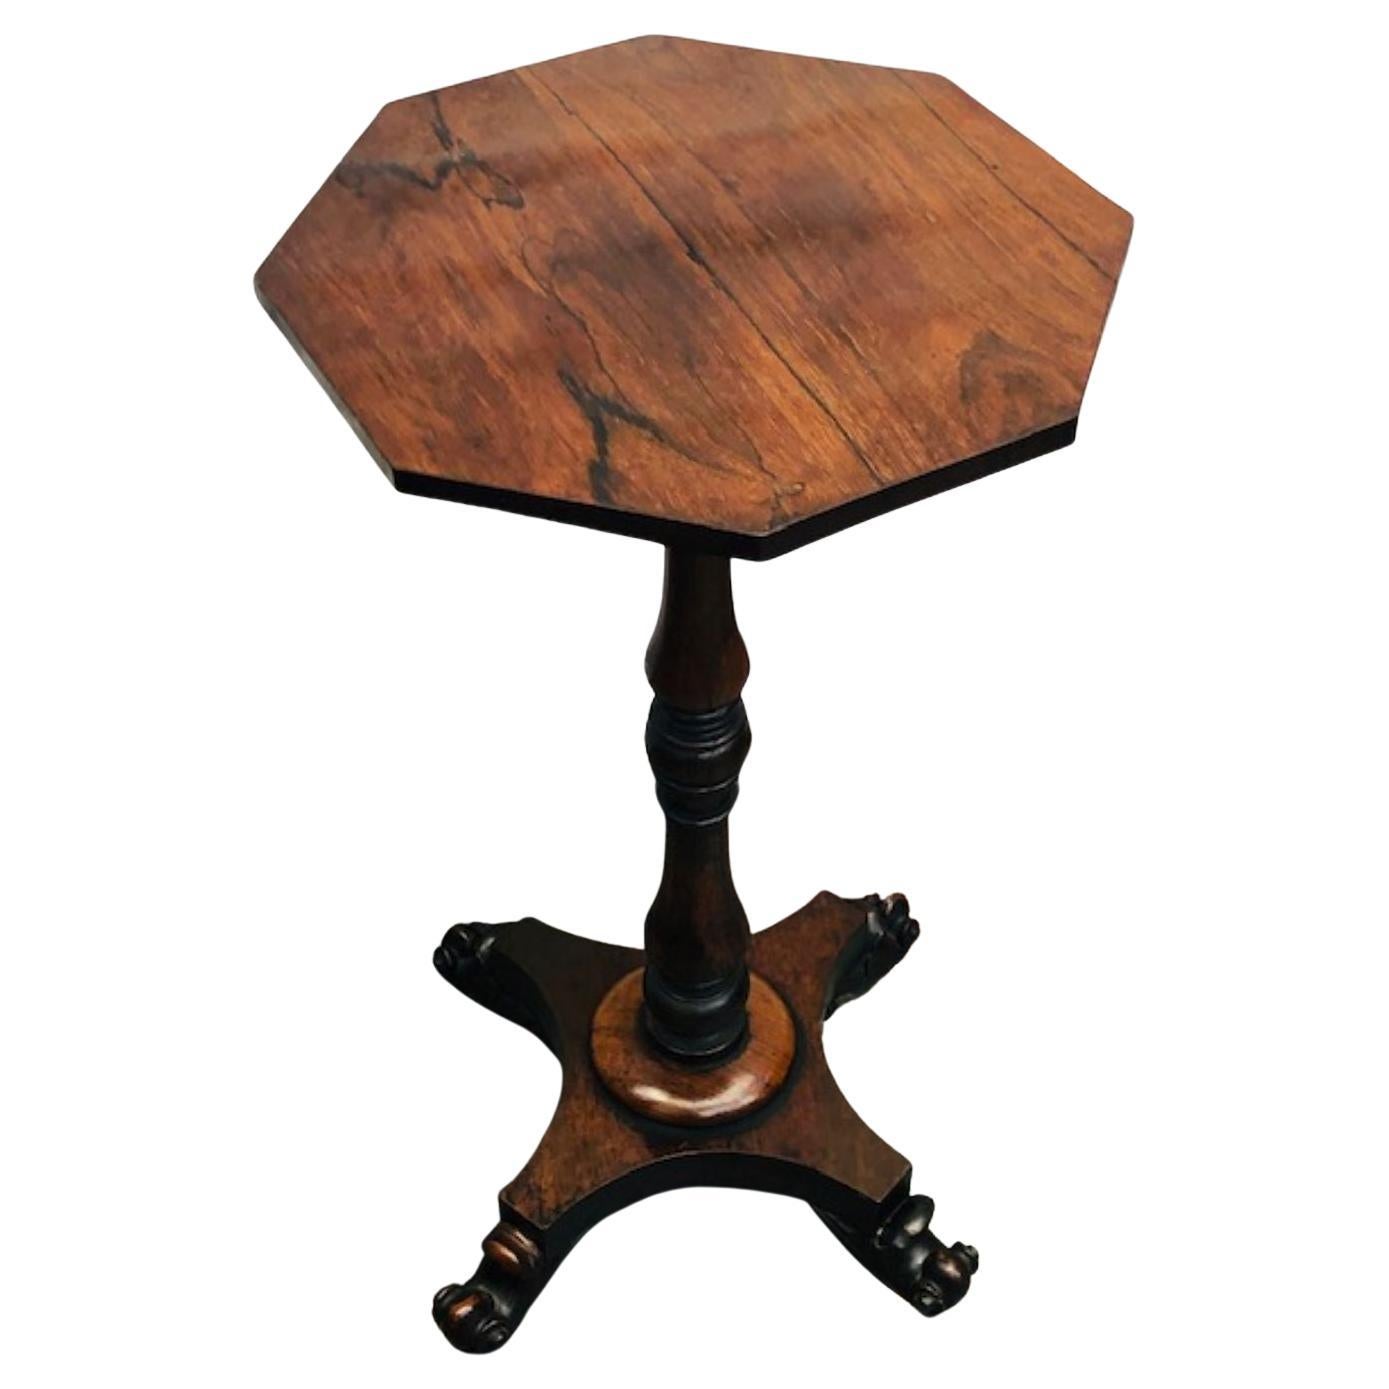 Antique Regency 19th Cent Octagonal Rosewood Wine Table, English, 1820